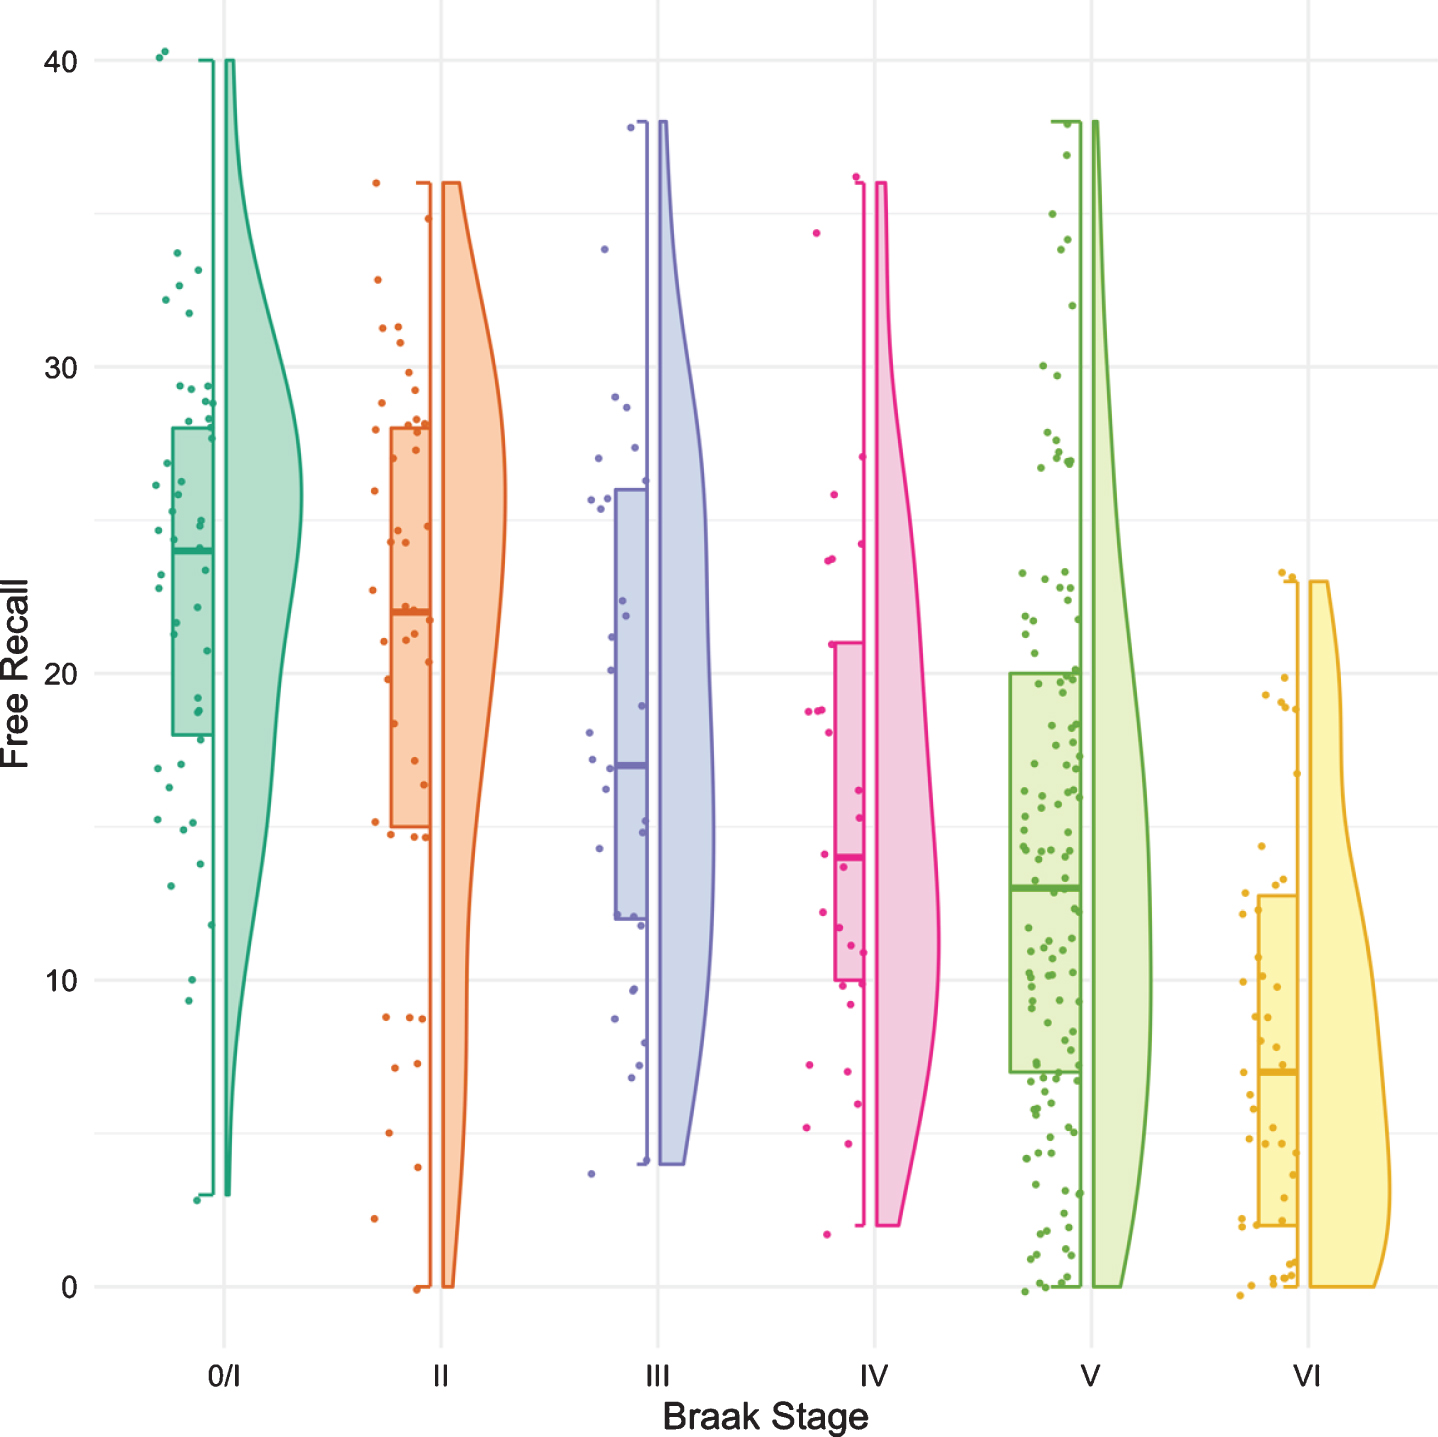 Boxplots and violin plots for free recall as a function of Braak stage.